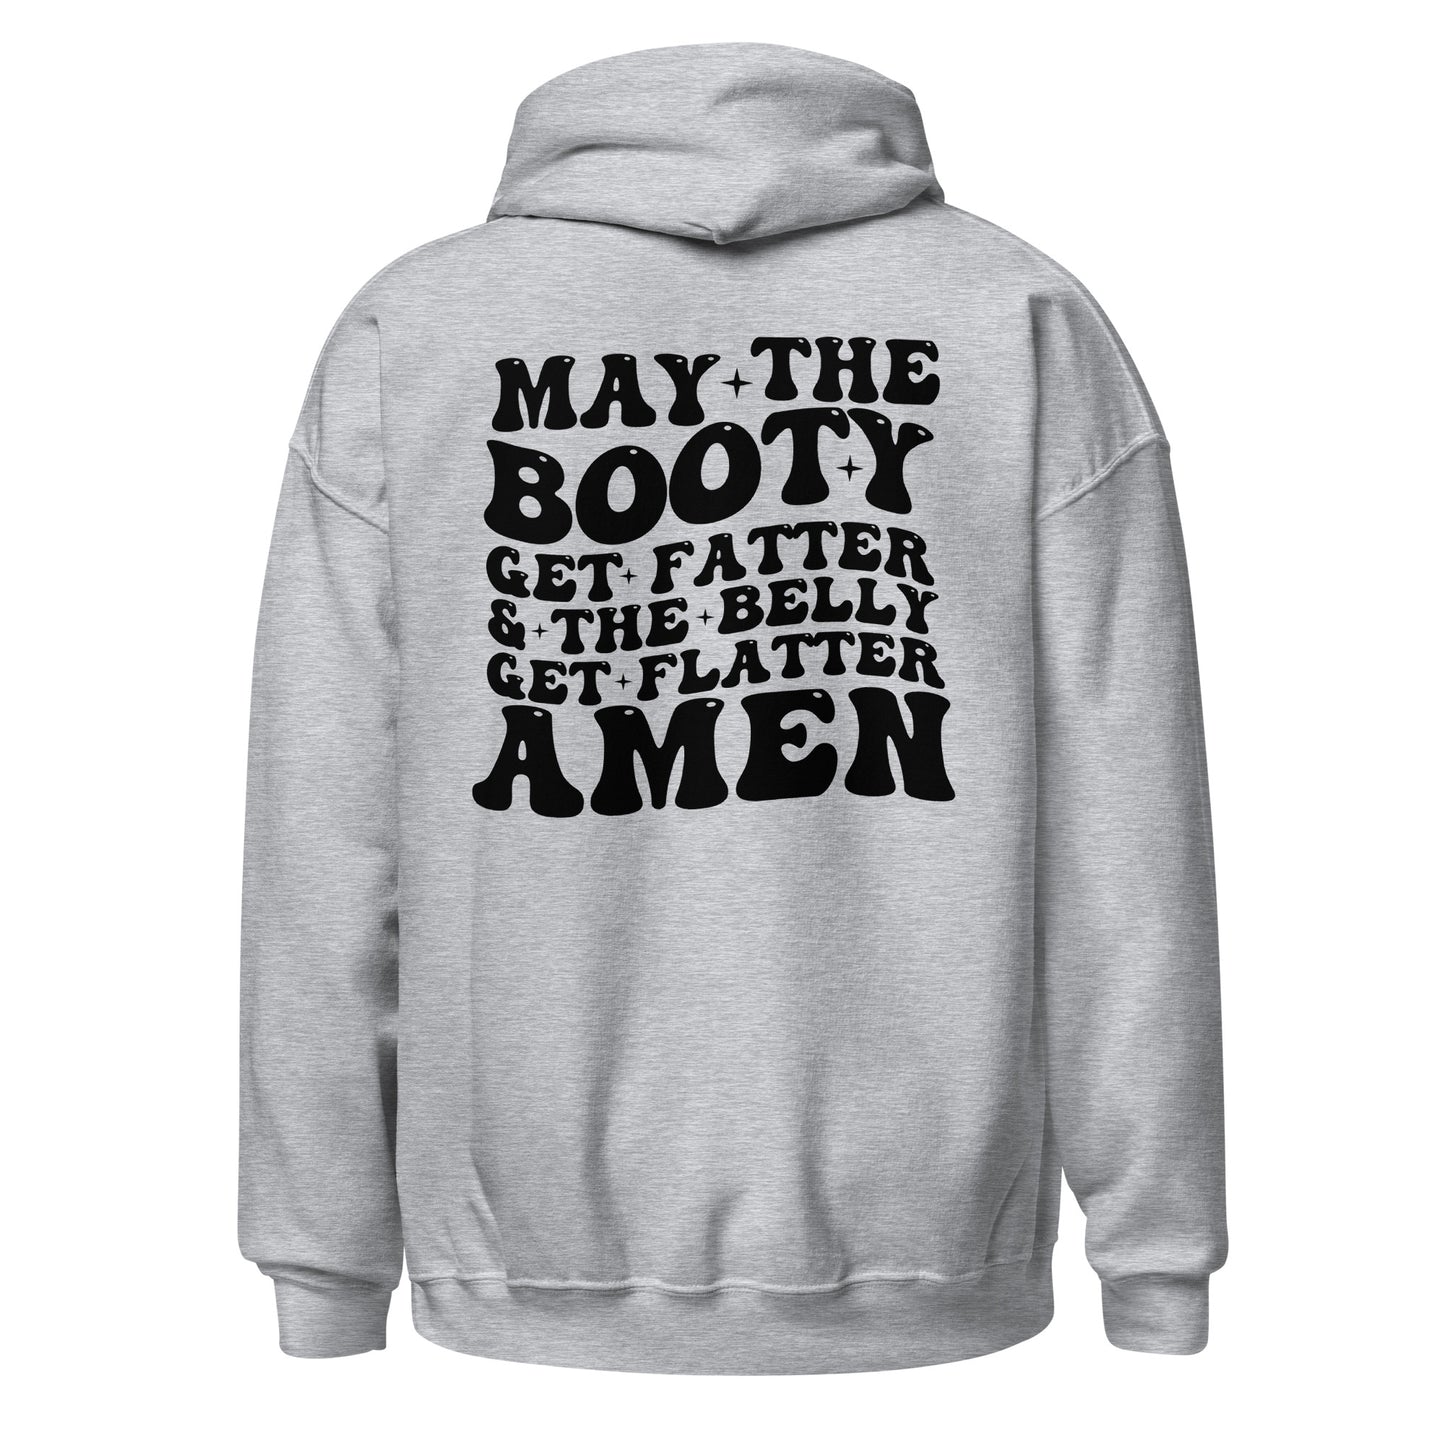 May The Booty Get Fatter Hoodie